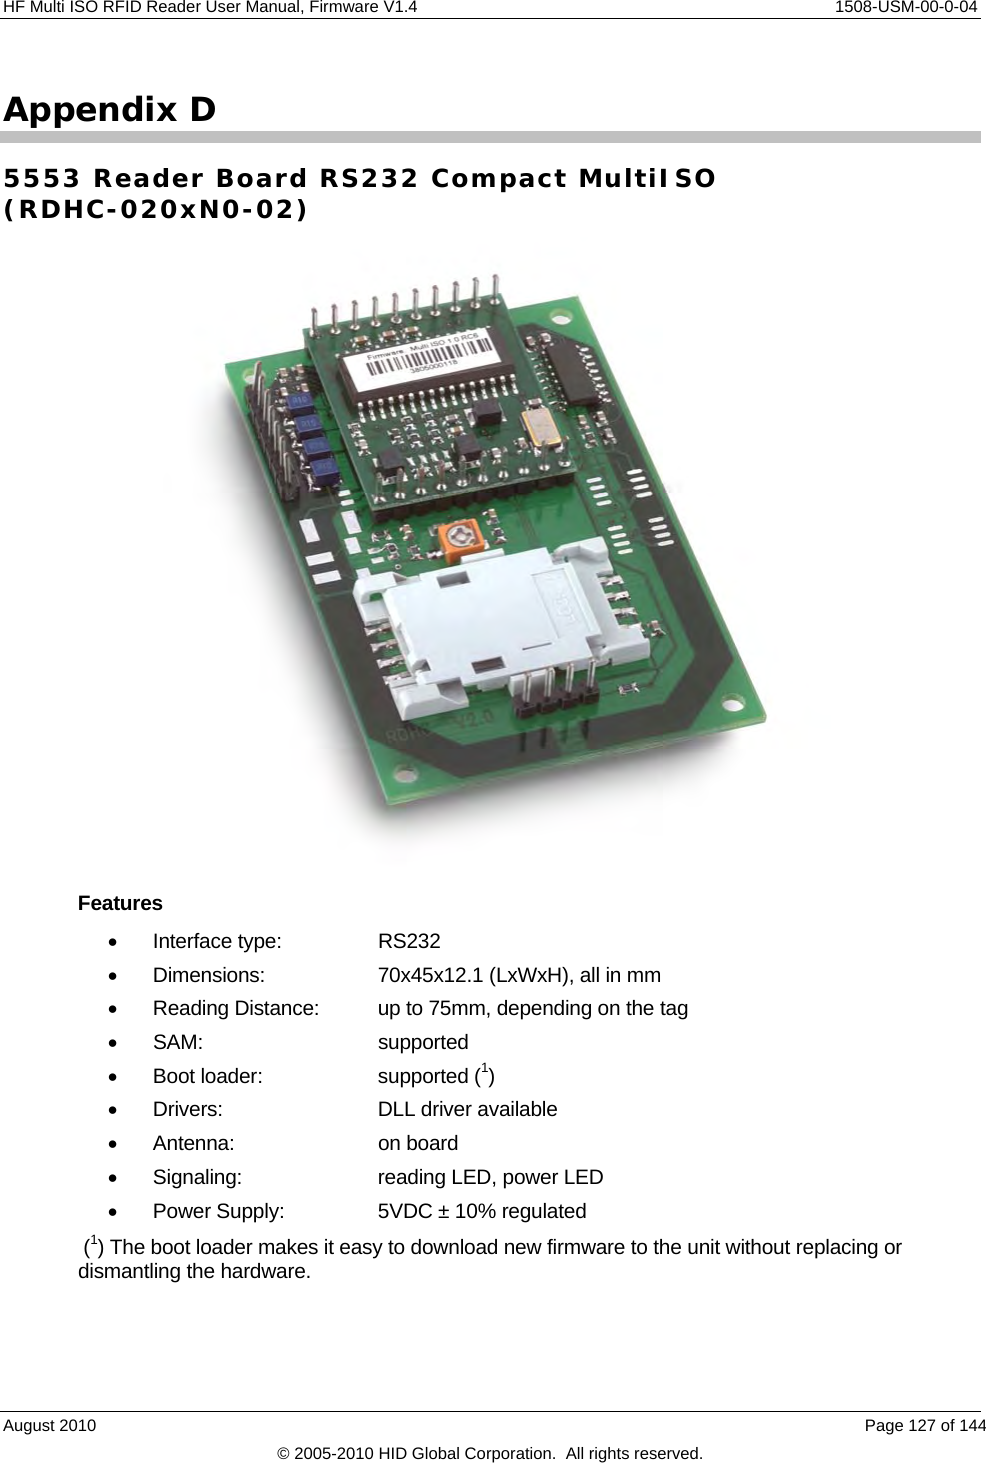  HF Multi ISO RFID Reader User Manual, Firmware V1.4    1508-USM-00-0-04 Appendix D 5553 Reader Board RS232 Compact MultiISO  (RDHC-020xN0-02)  Features  Interface type:   RS232   Dimensions:    70x45x12.1 (LxWxH), all in mm   Reading Distance:  up to 75mm, depending on the tag  SAM:   supported   Boot loader:    supported (1)  Drivers:   DLL driver available  Antenna:    on board   Signaling:    reading LED, power LED   Power Supply:    5VDC ± 10% regulated  (1) The boot loader makes it easy to download new firmware to the unit without replacing or dismantling the hardware.August 2010    Page 127 of 144 © 2005-2010 HID Global Corporation.  All rights reserved. 